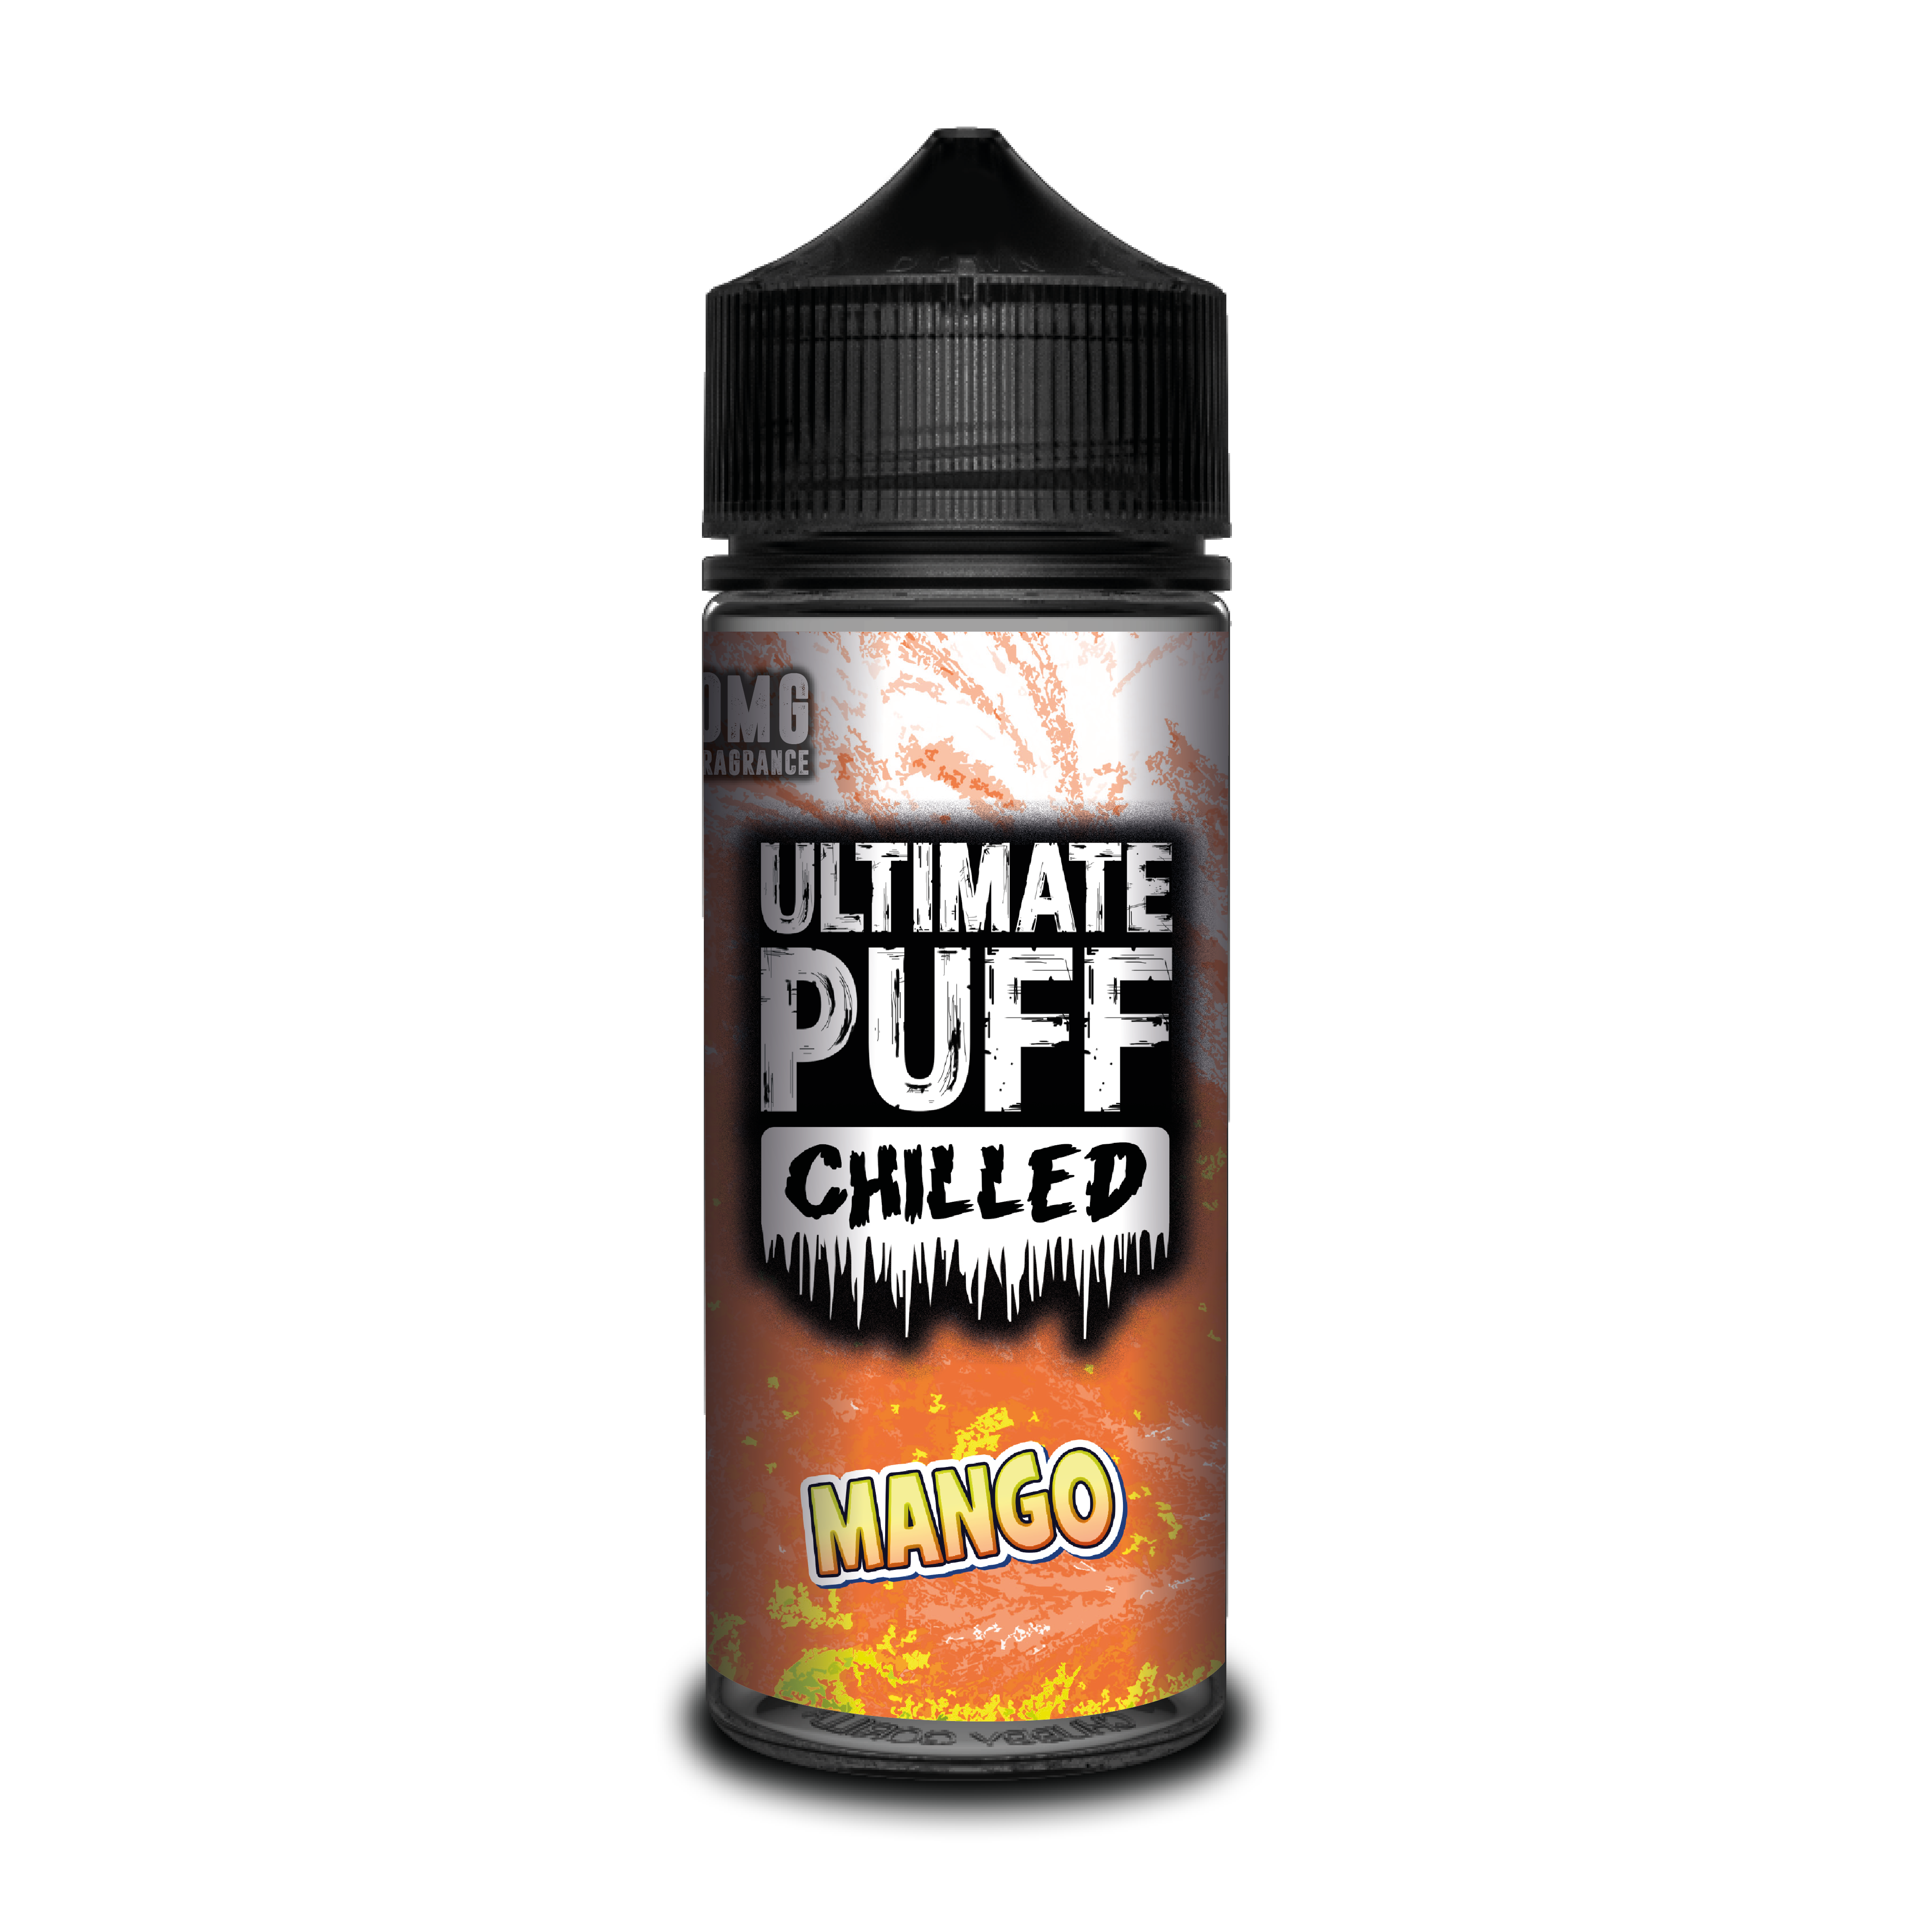 Mango Chilled by Ultimate puff 100ml